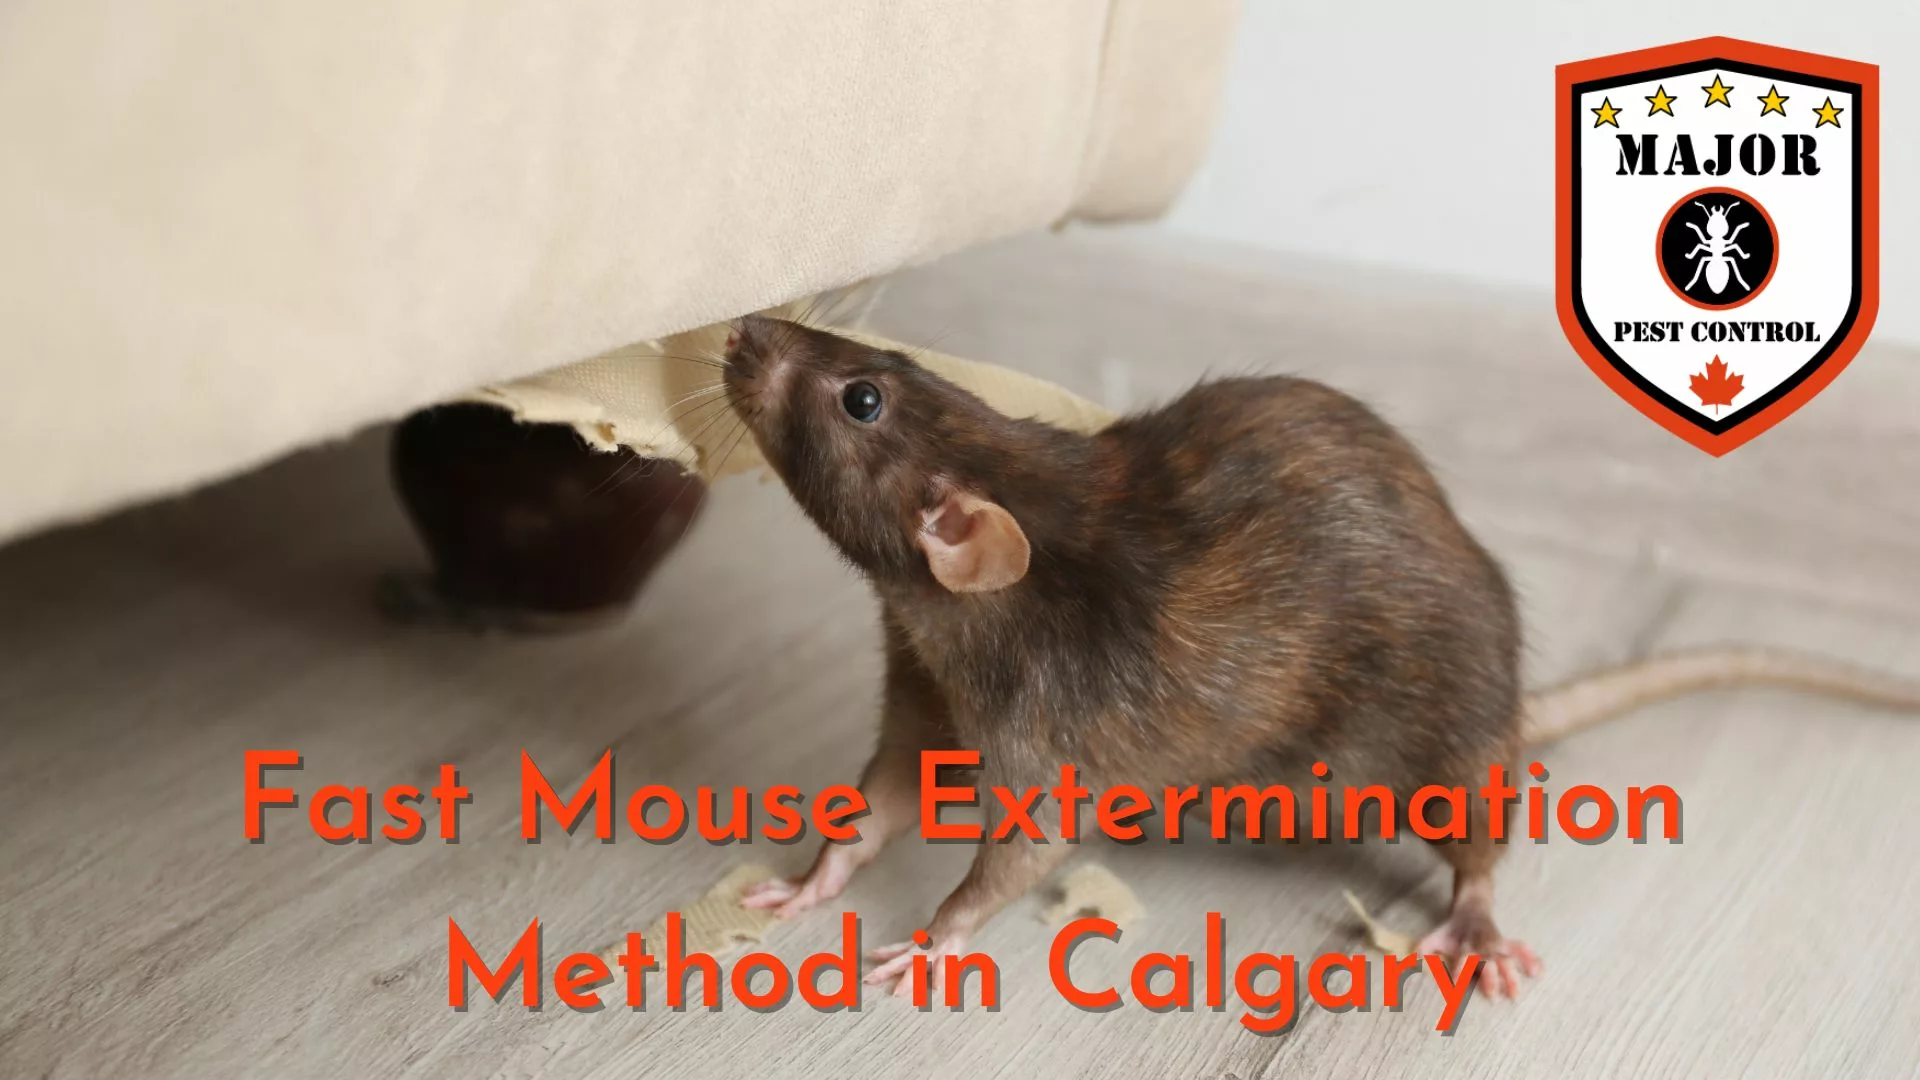 Fast Mouse Extermination Method in Calgary